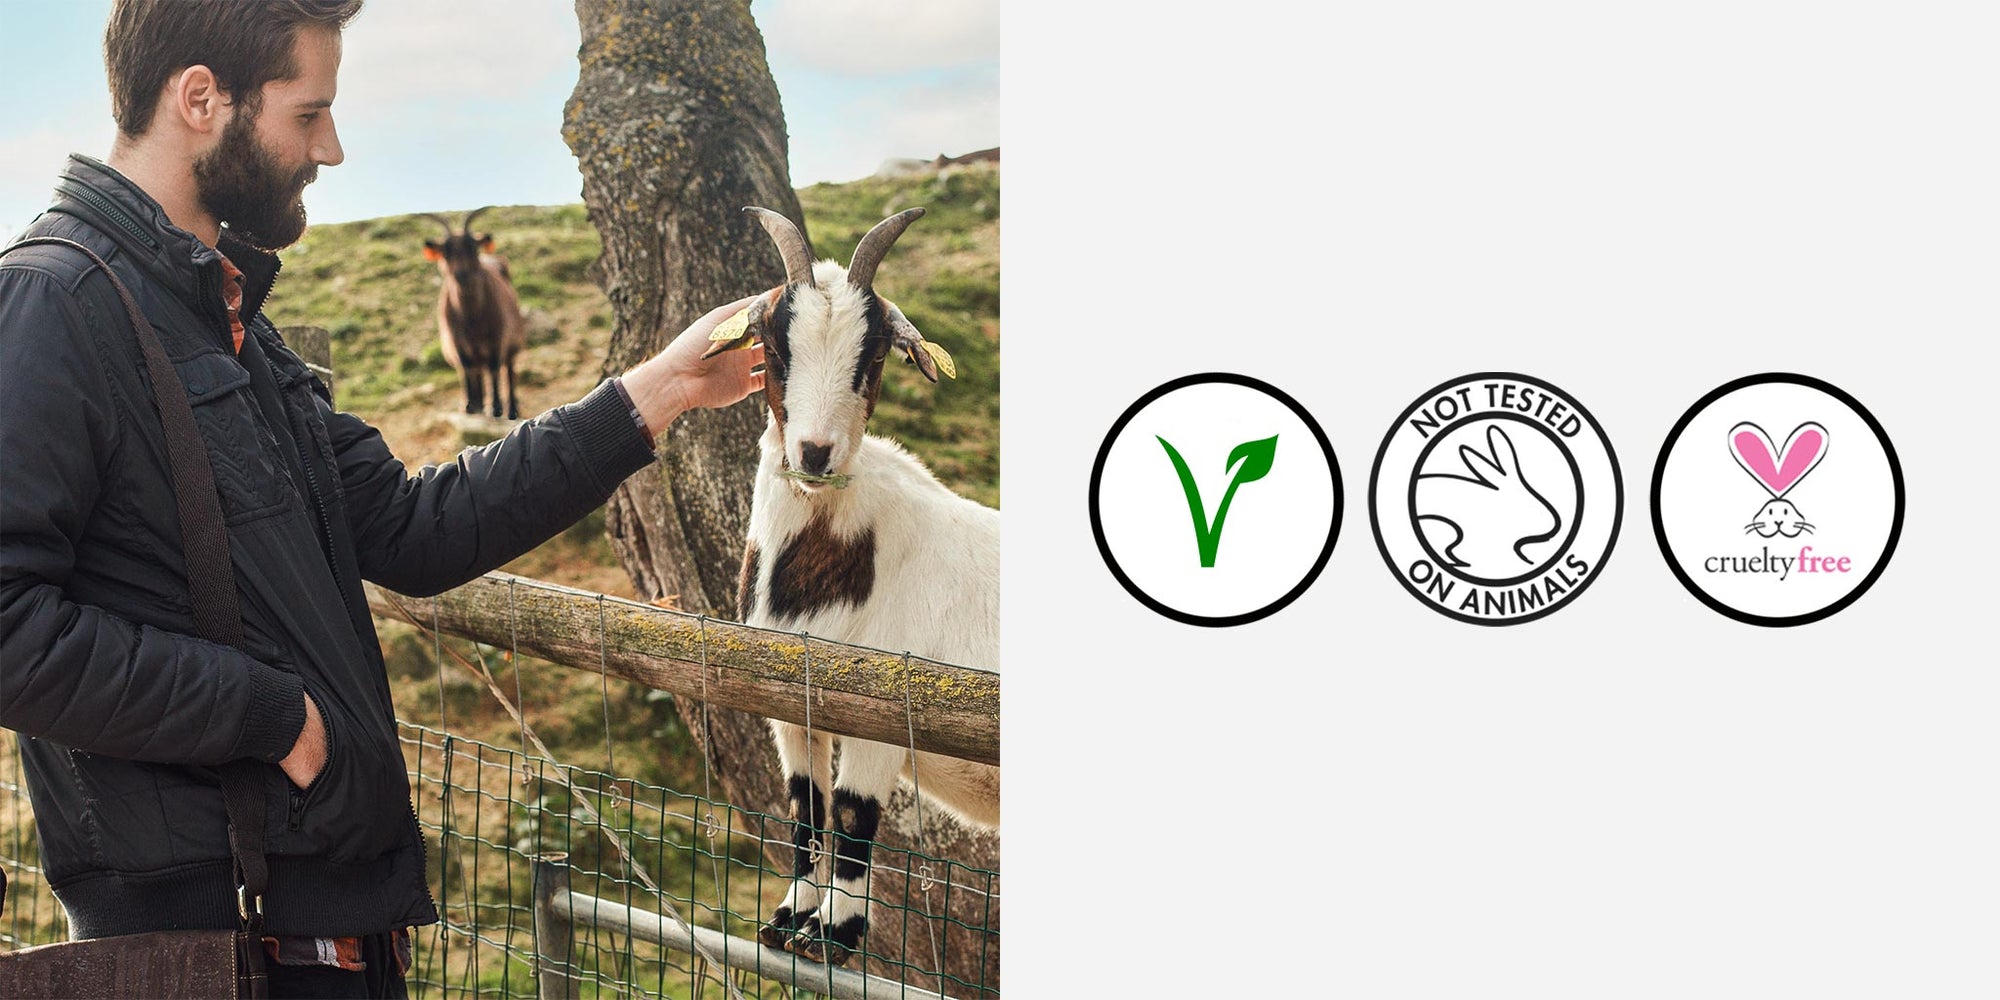 Man petting a goat. Representing the Corkor brand values: cruelty free, vegan products.